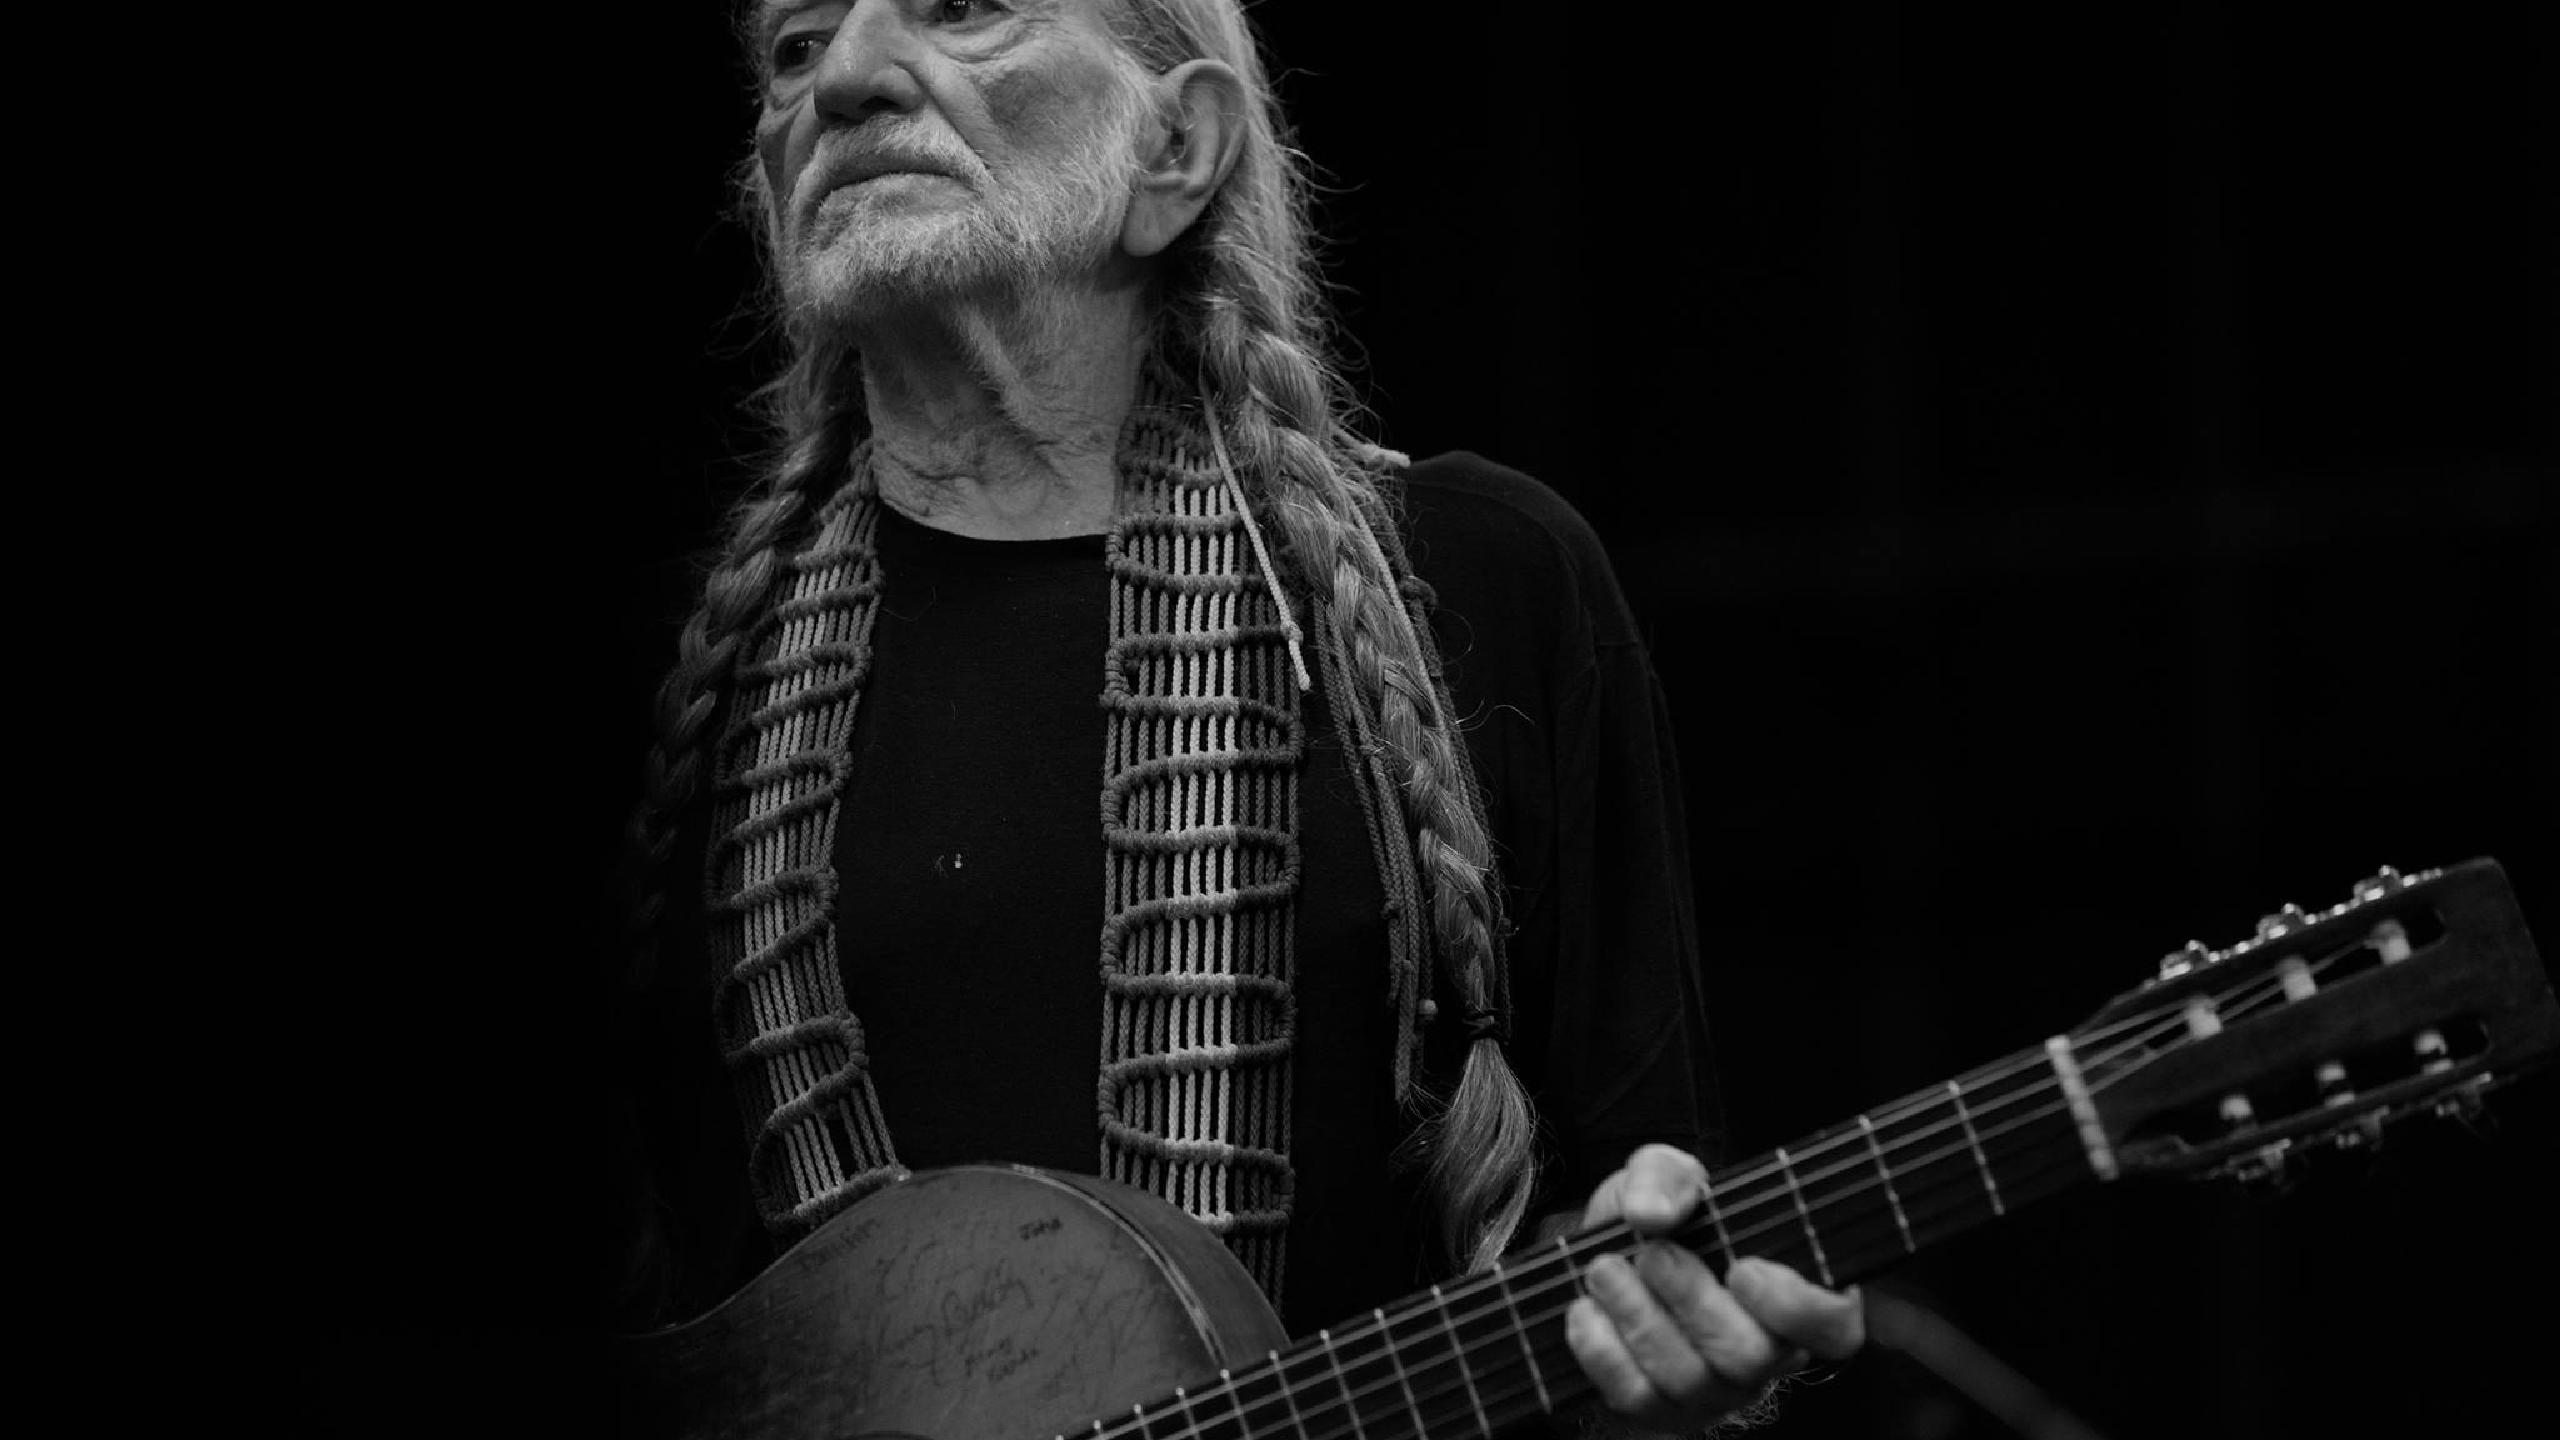 Willie Nelson tour dates 2022 2023. Willie Nelson tickets and concerts